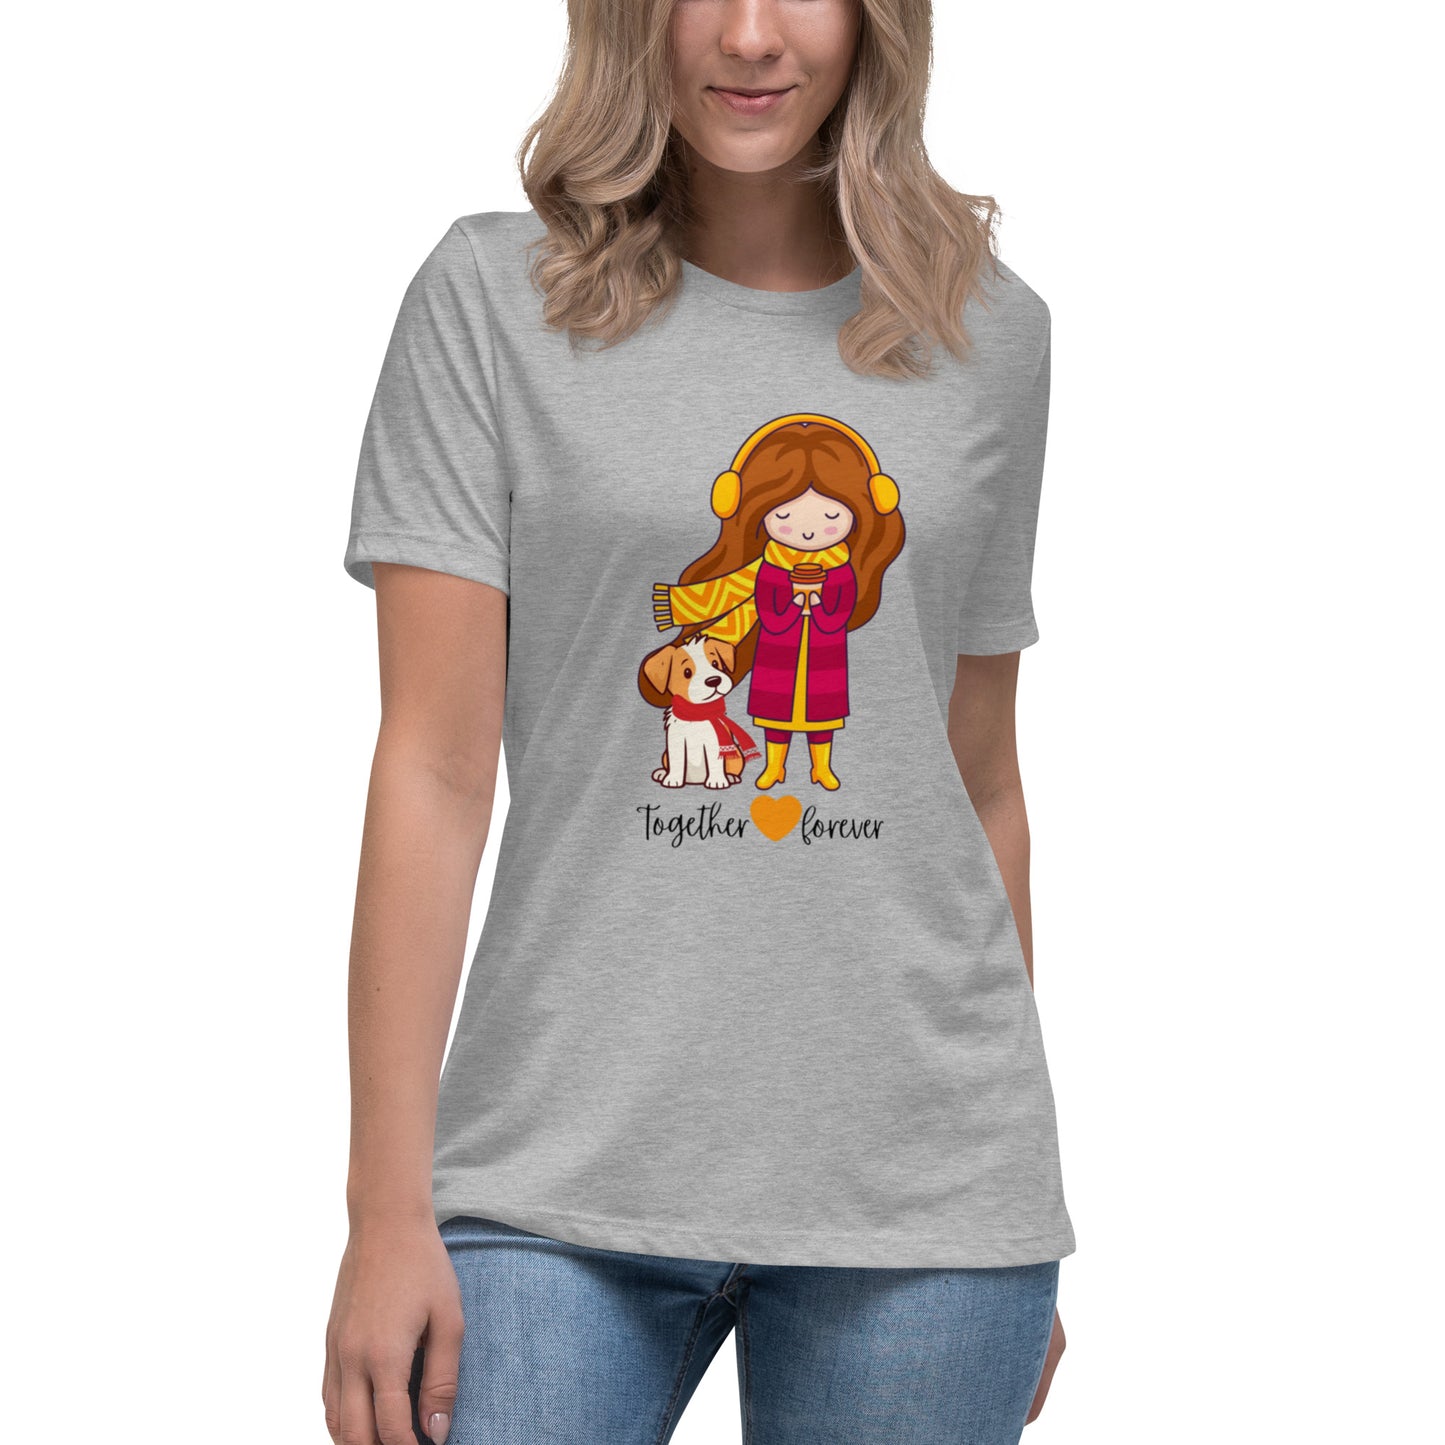 Together Forever Women's Relaxed T-Shirt